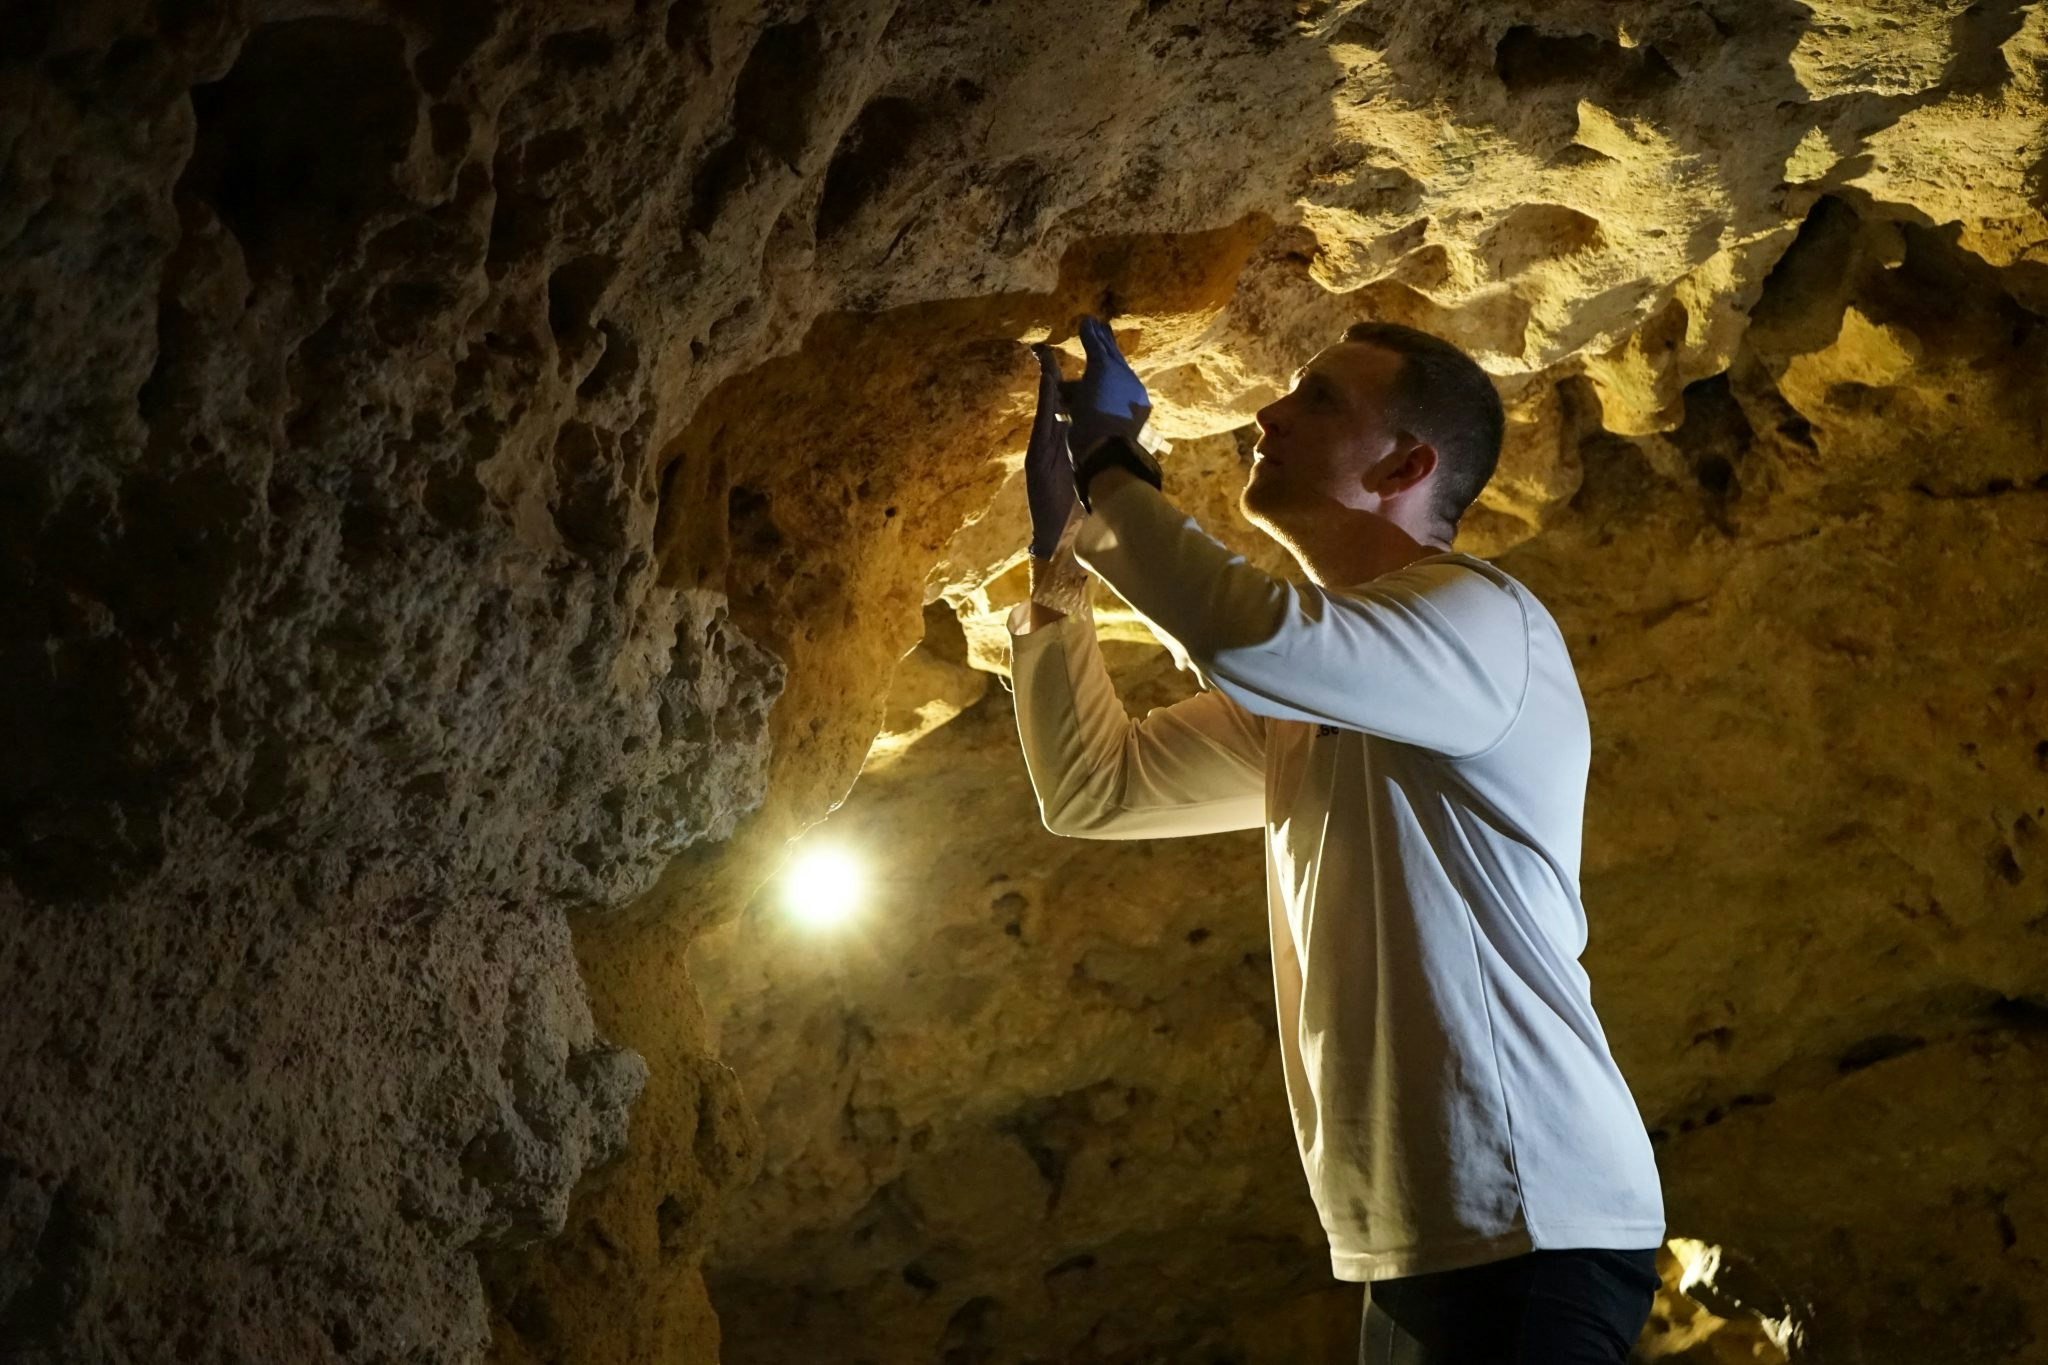 A light shines on Basecamp's Clark as he inspects a substance on the cave ceiling in Hungary.